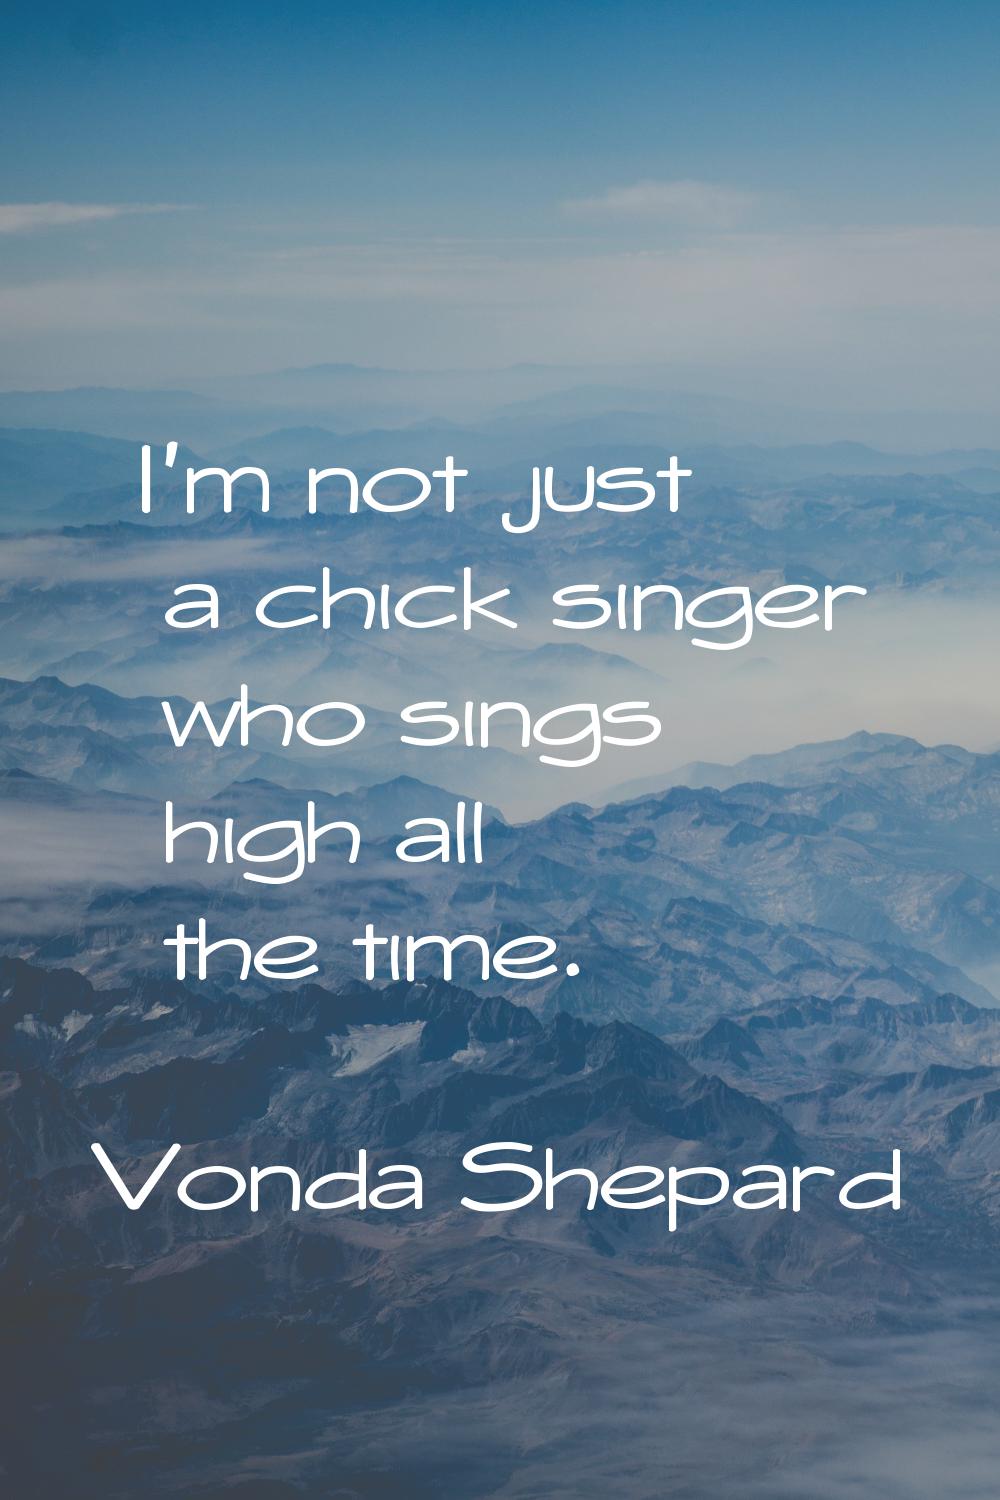 I'm not just a chick singer who sings high all the time.